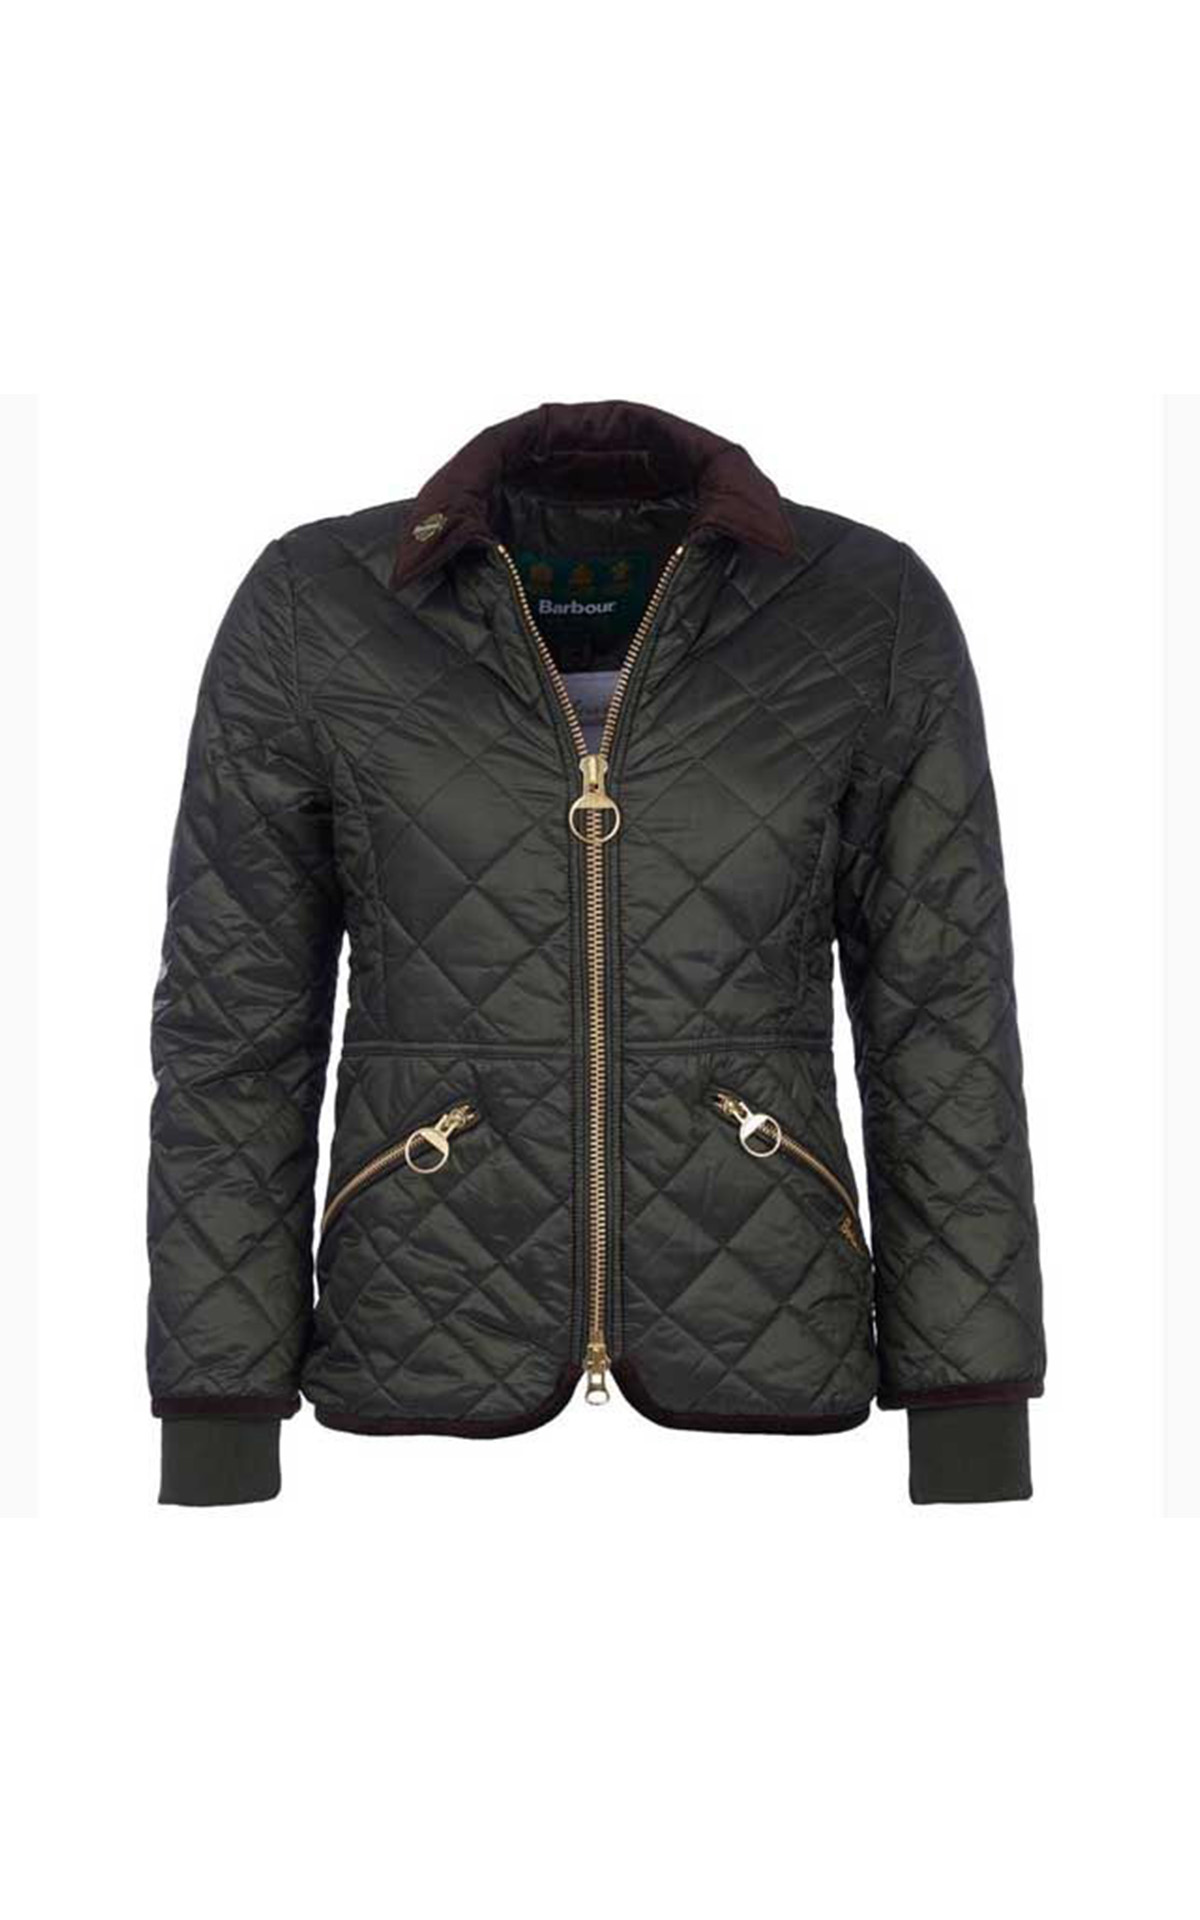 local barbour stockists